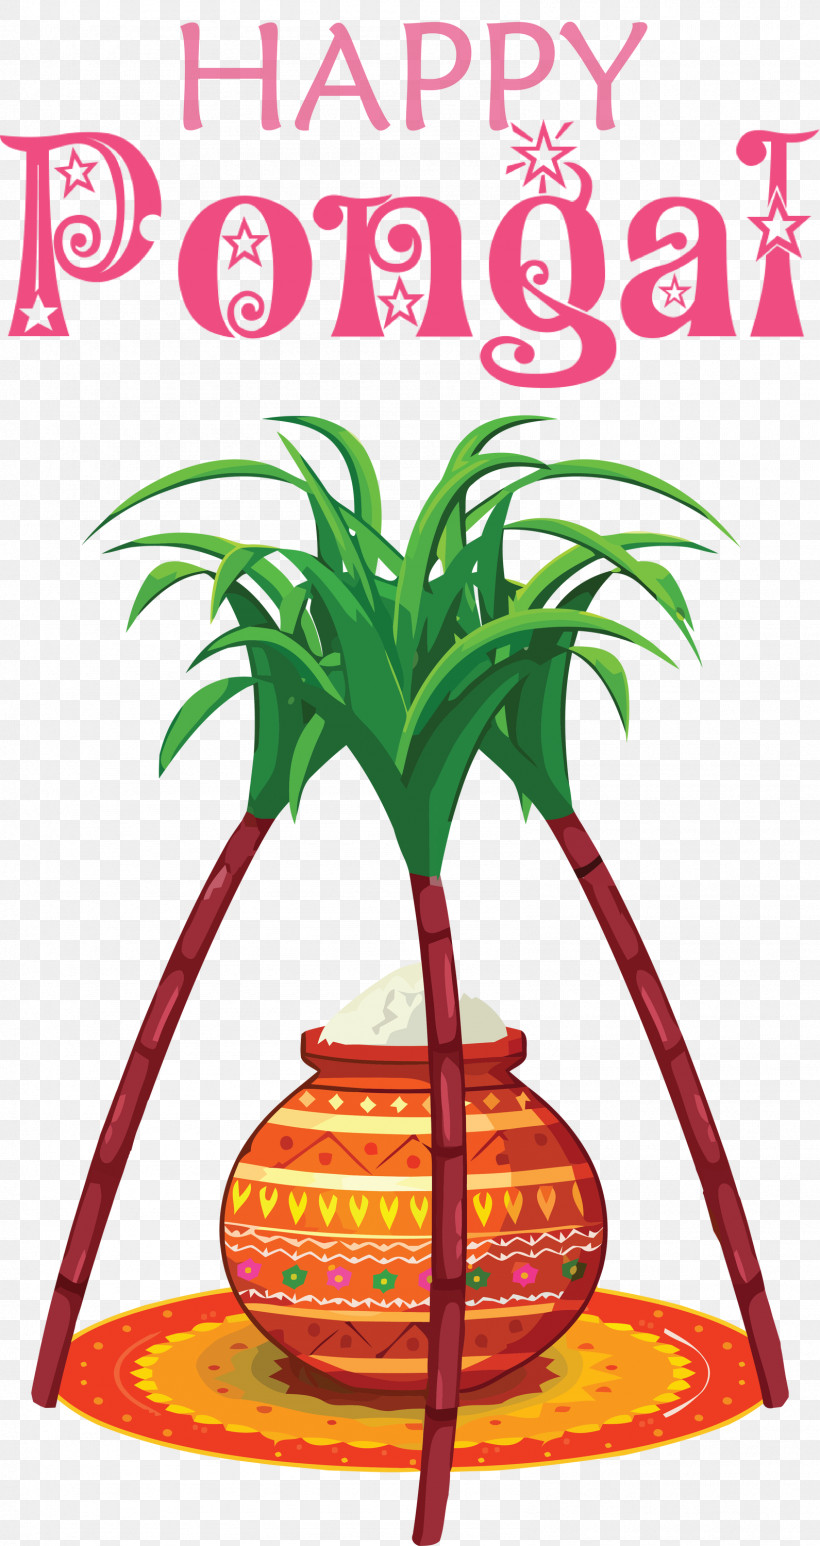 Pongal Happy Pongal, PNG, 1591x3000px, Pongal, Festival, Happy Pongal, Harvest Festival, Thanksgiving Download Free